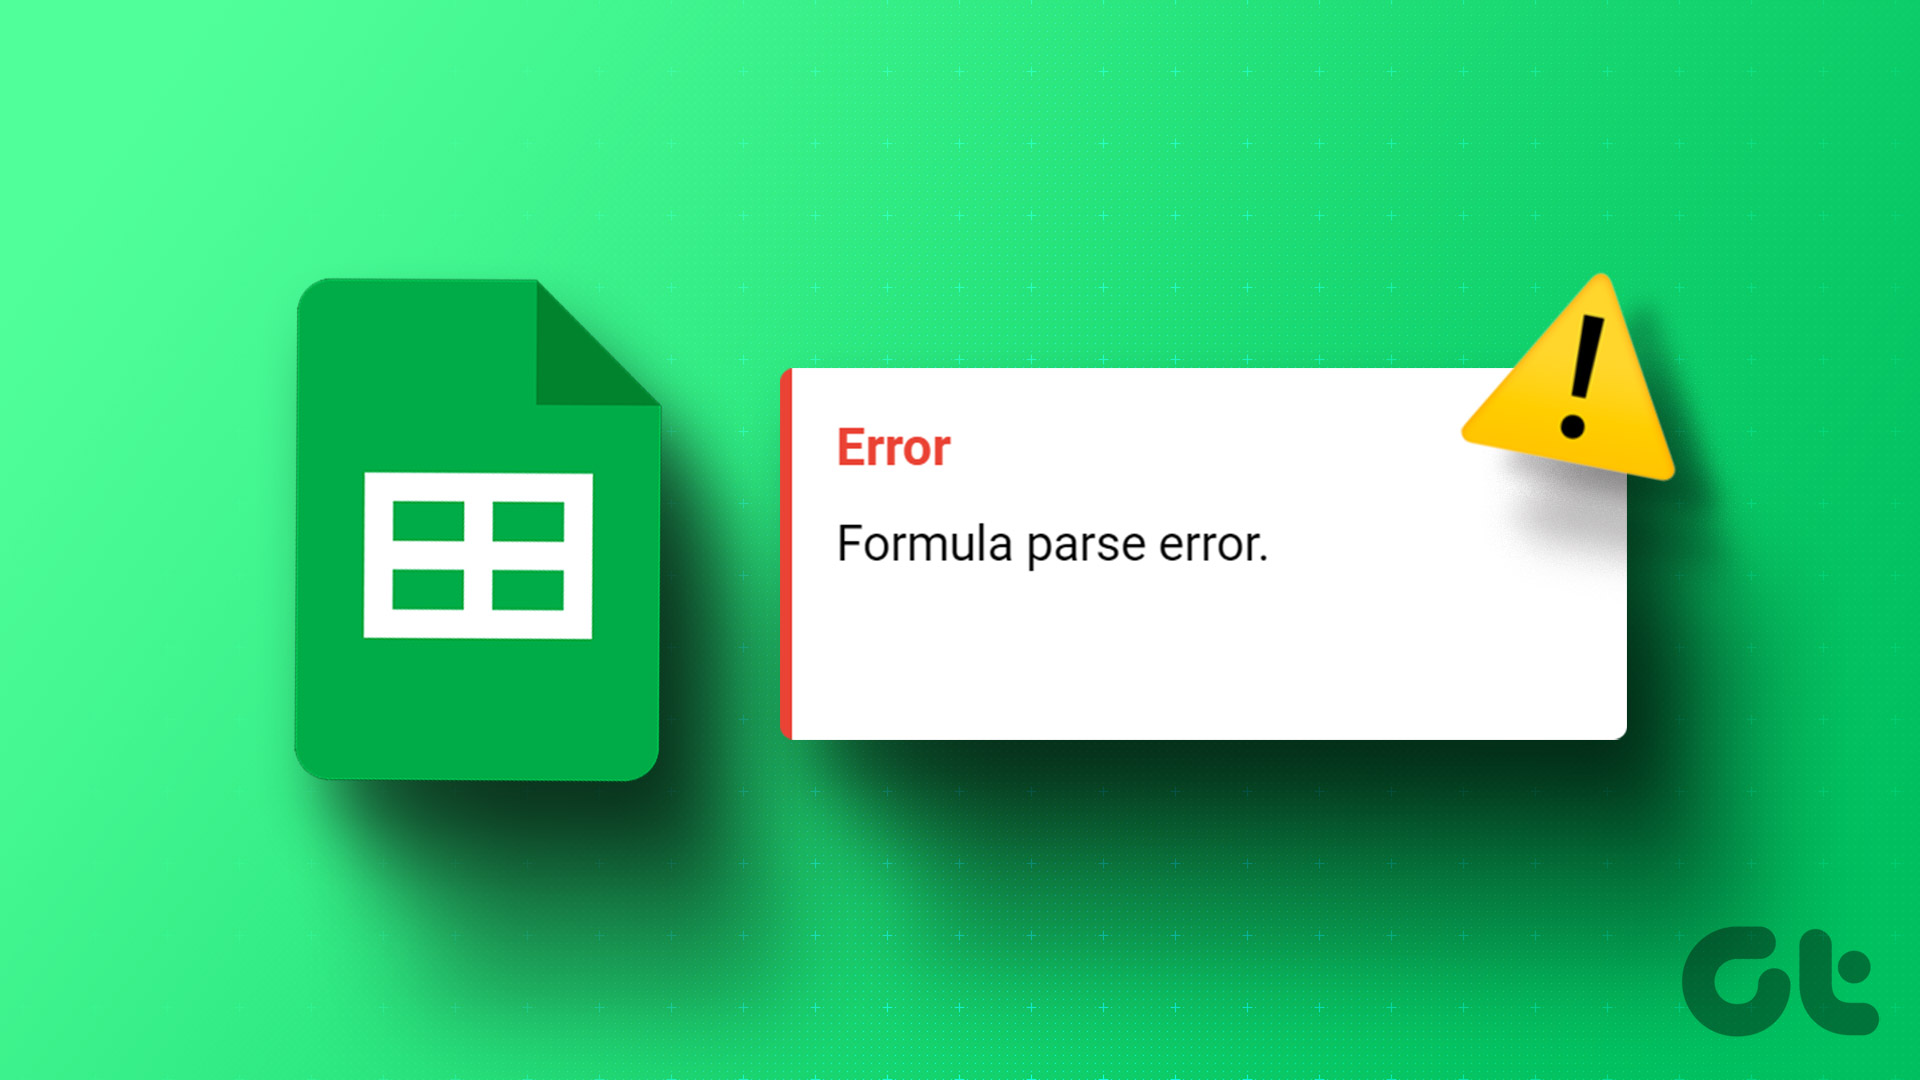 Troubleshooting Formula Parse Errors in Google Sheets